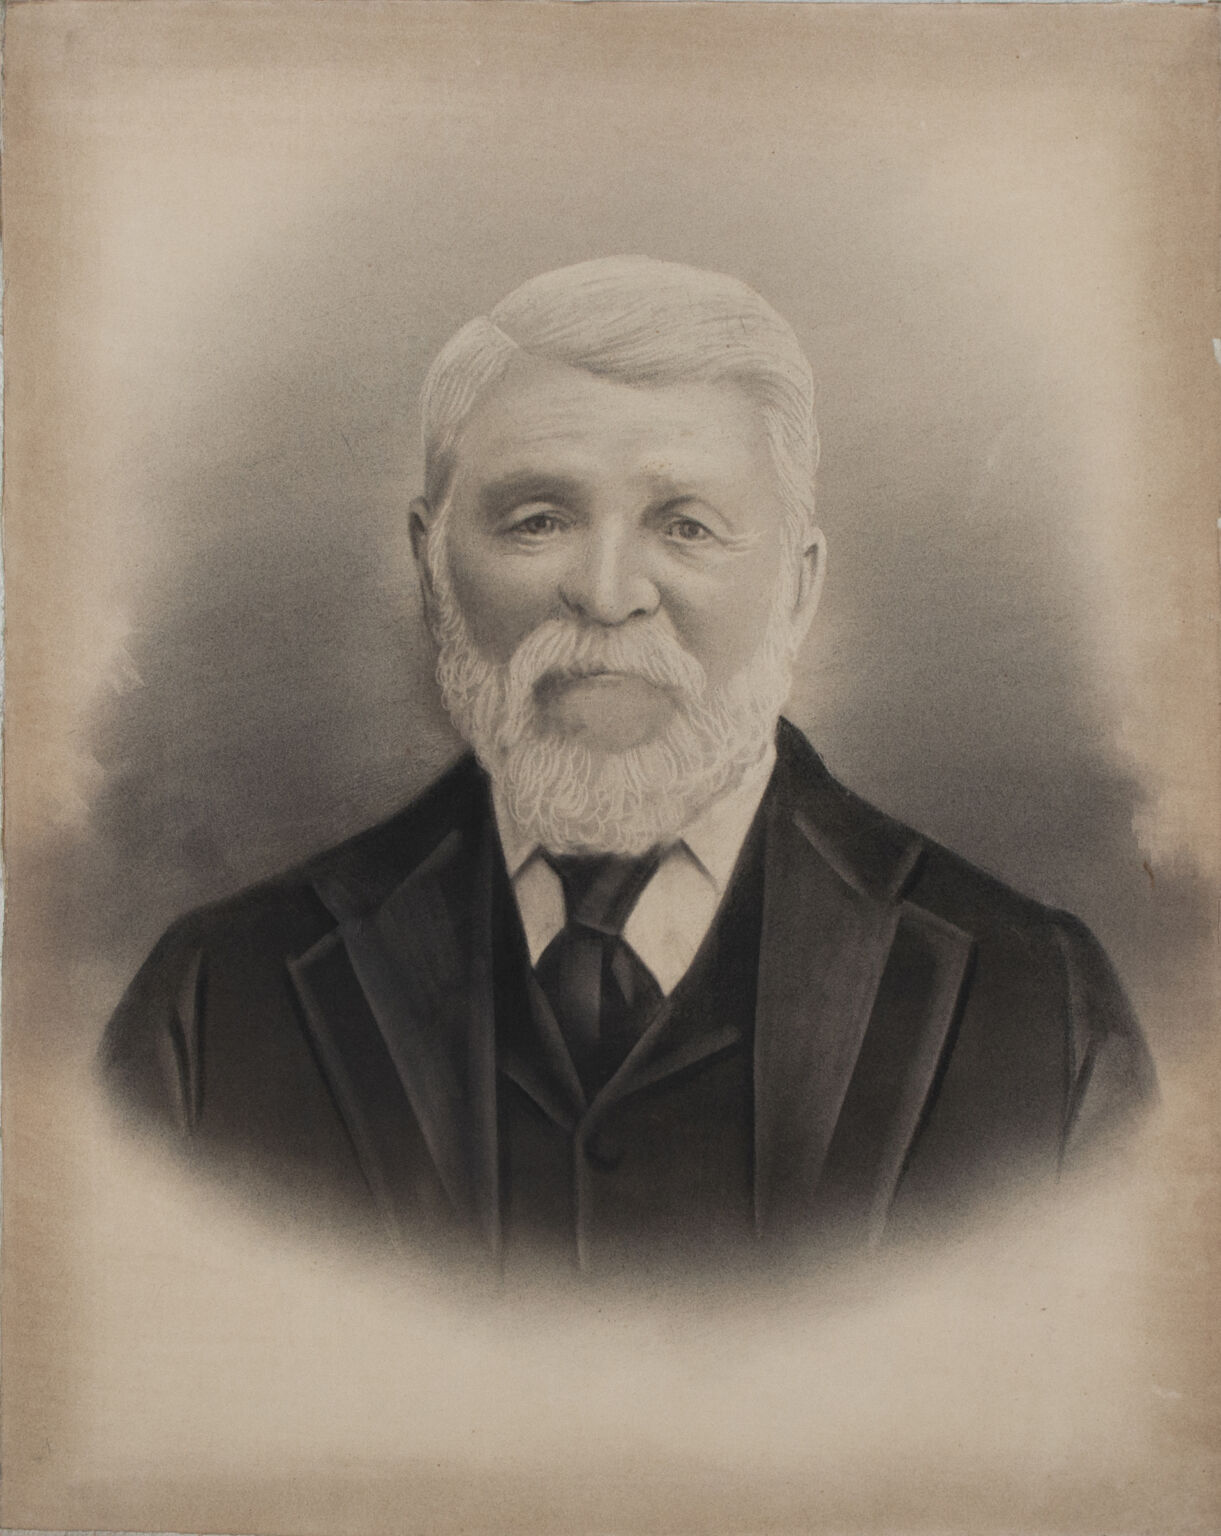 Unframed portrait of middle-aged man with white hair and beard wearing a black three-piece suit.